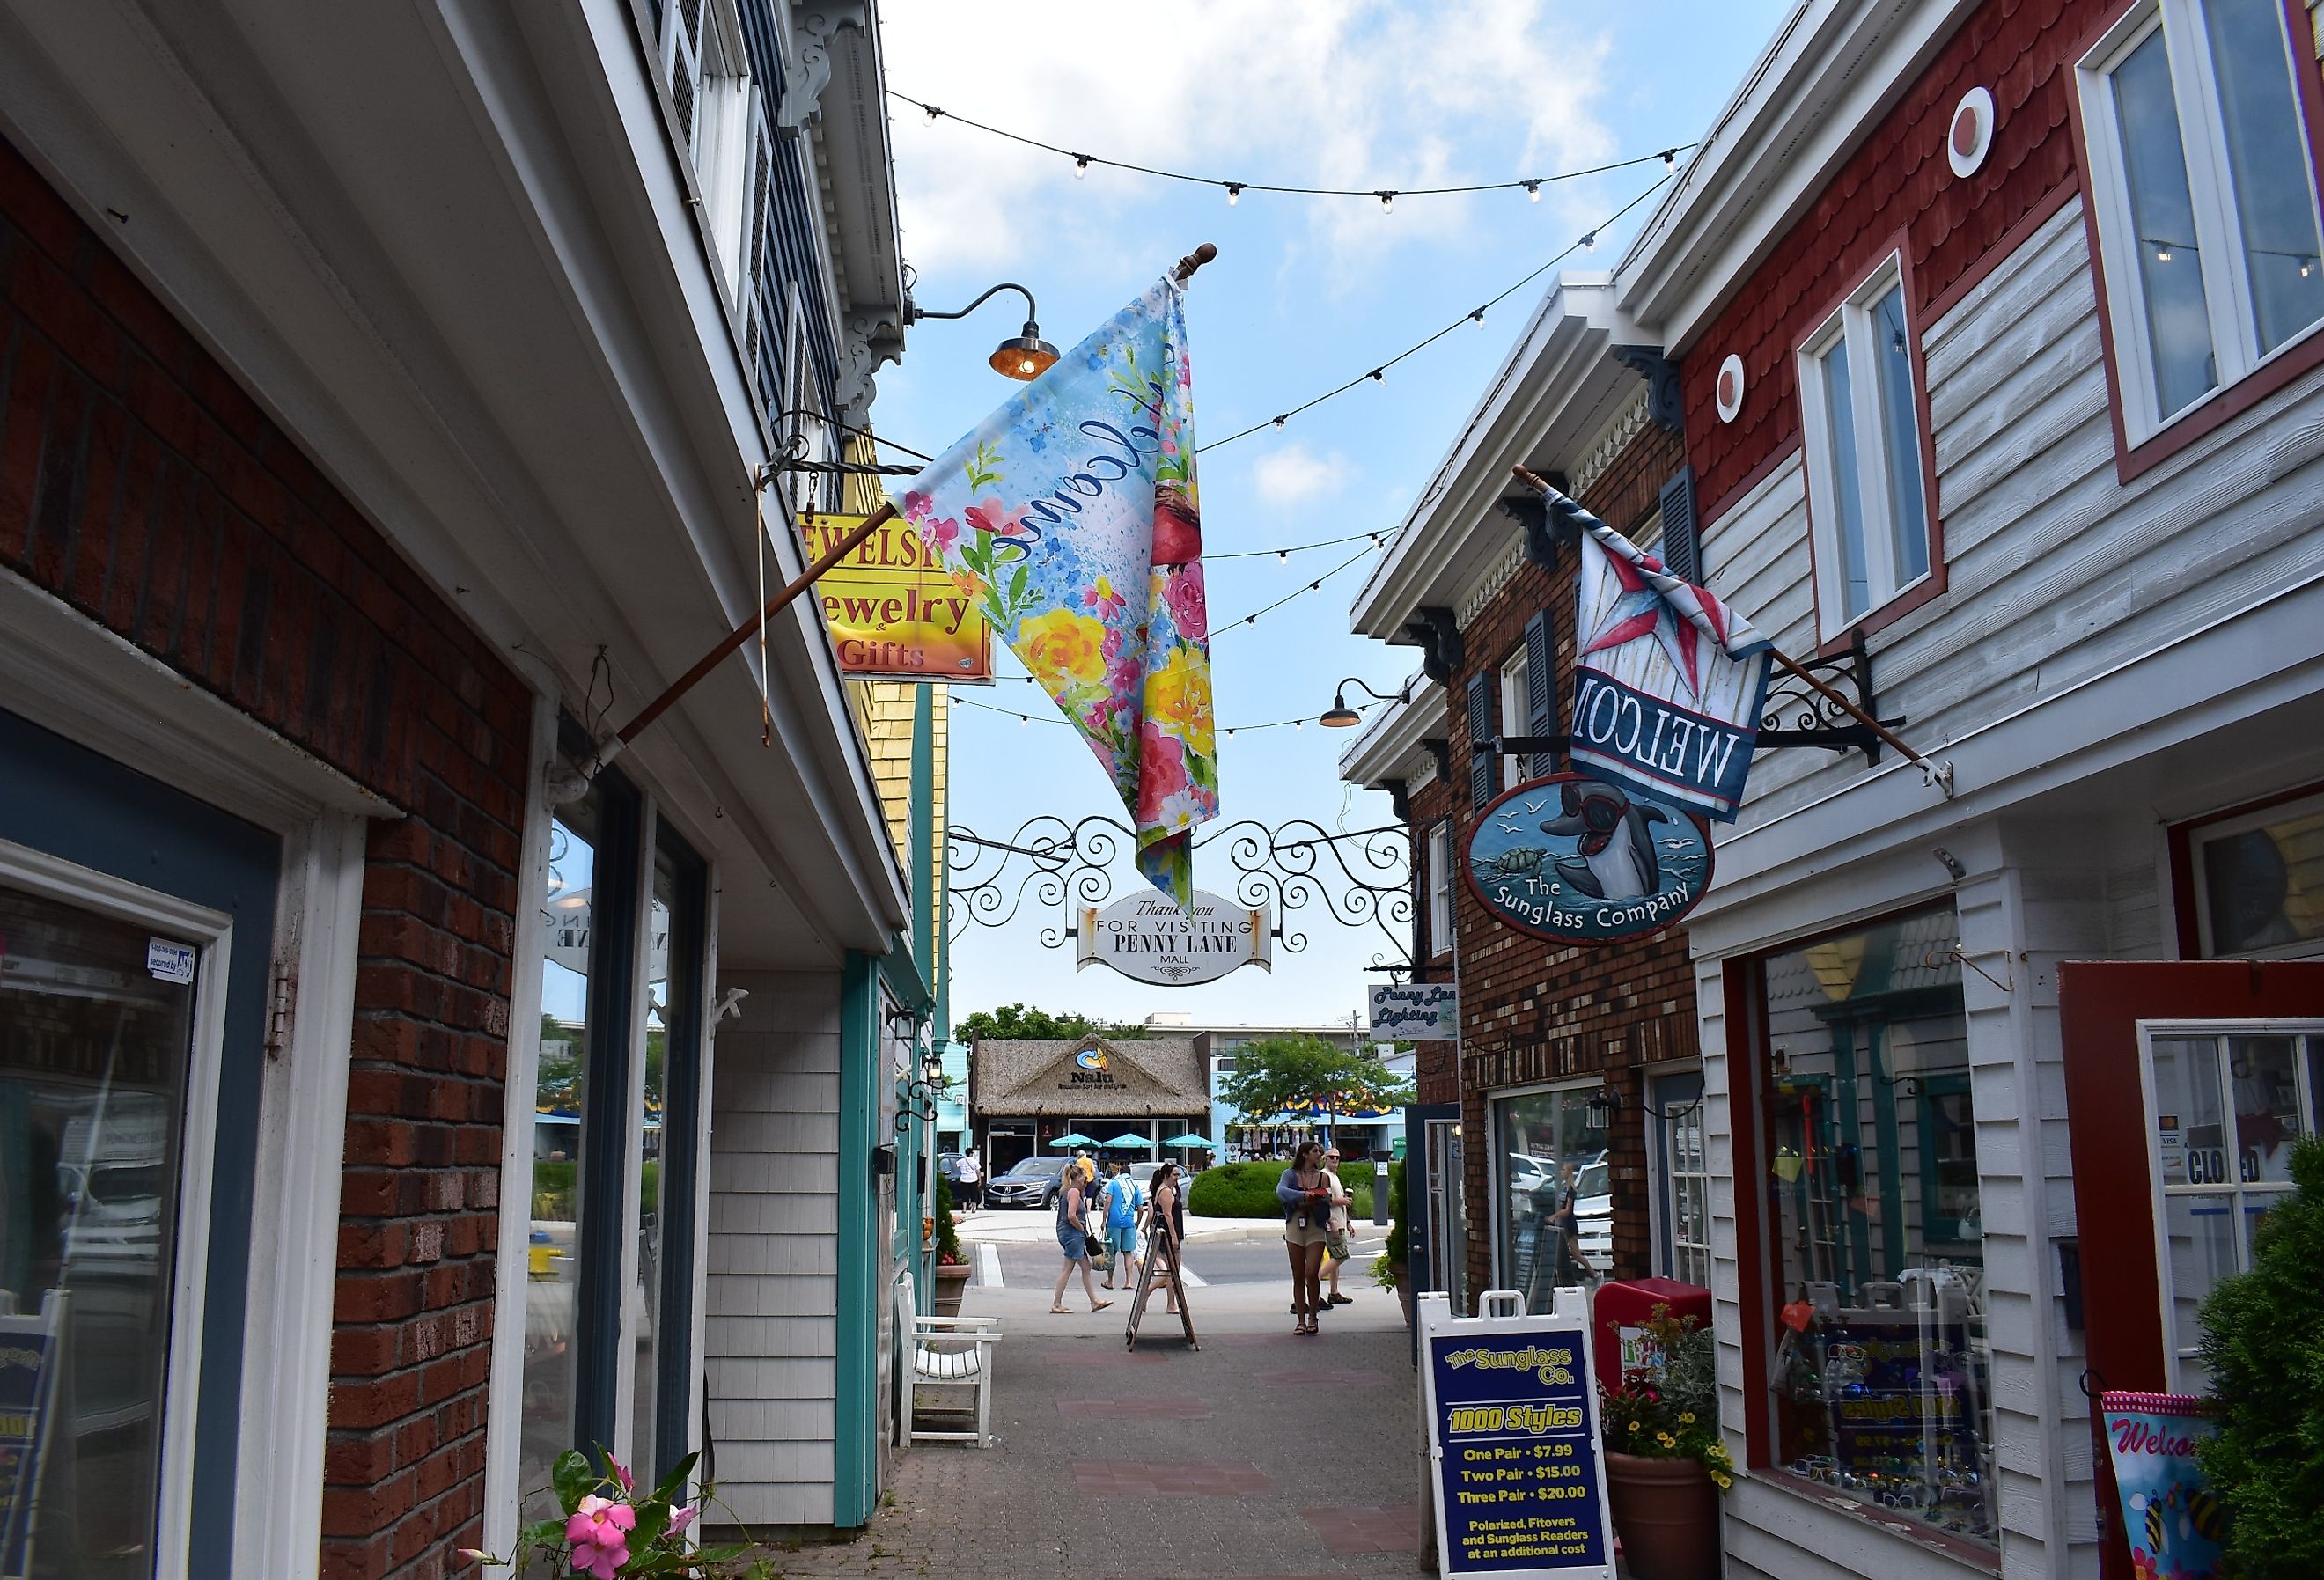 Delaware’s Rehoboth Beach and it’s shops along the boardwalk, Penny Lane Mall. Image credit Foolish Productions via Shutterstock